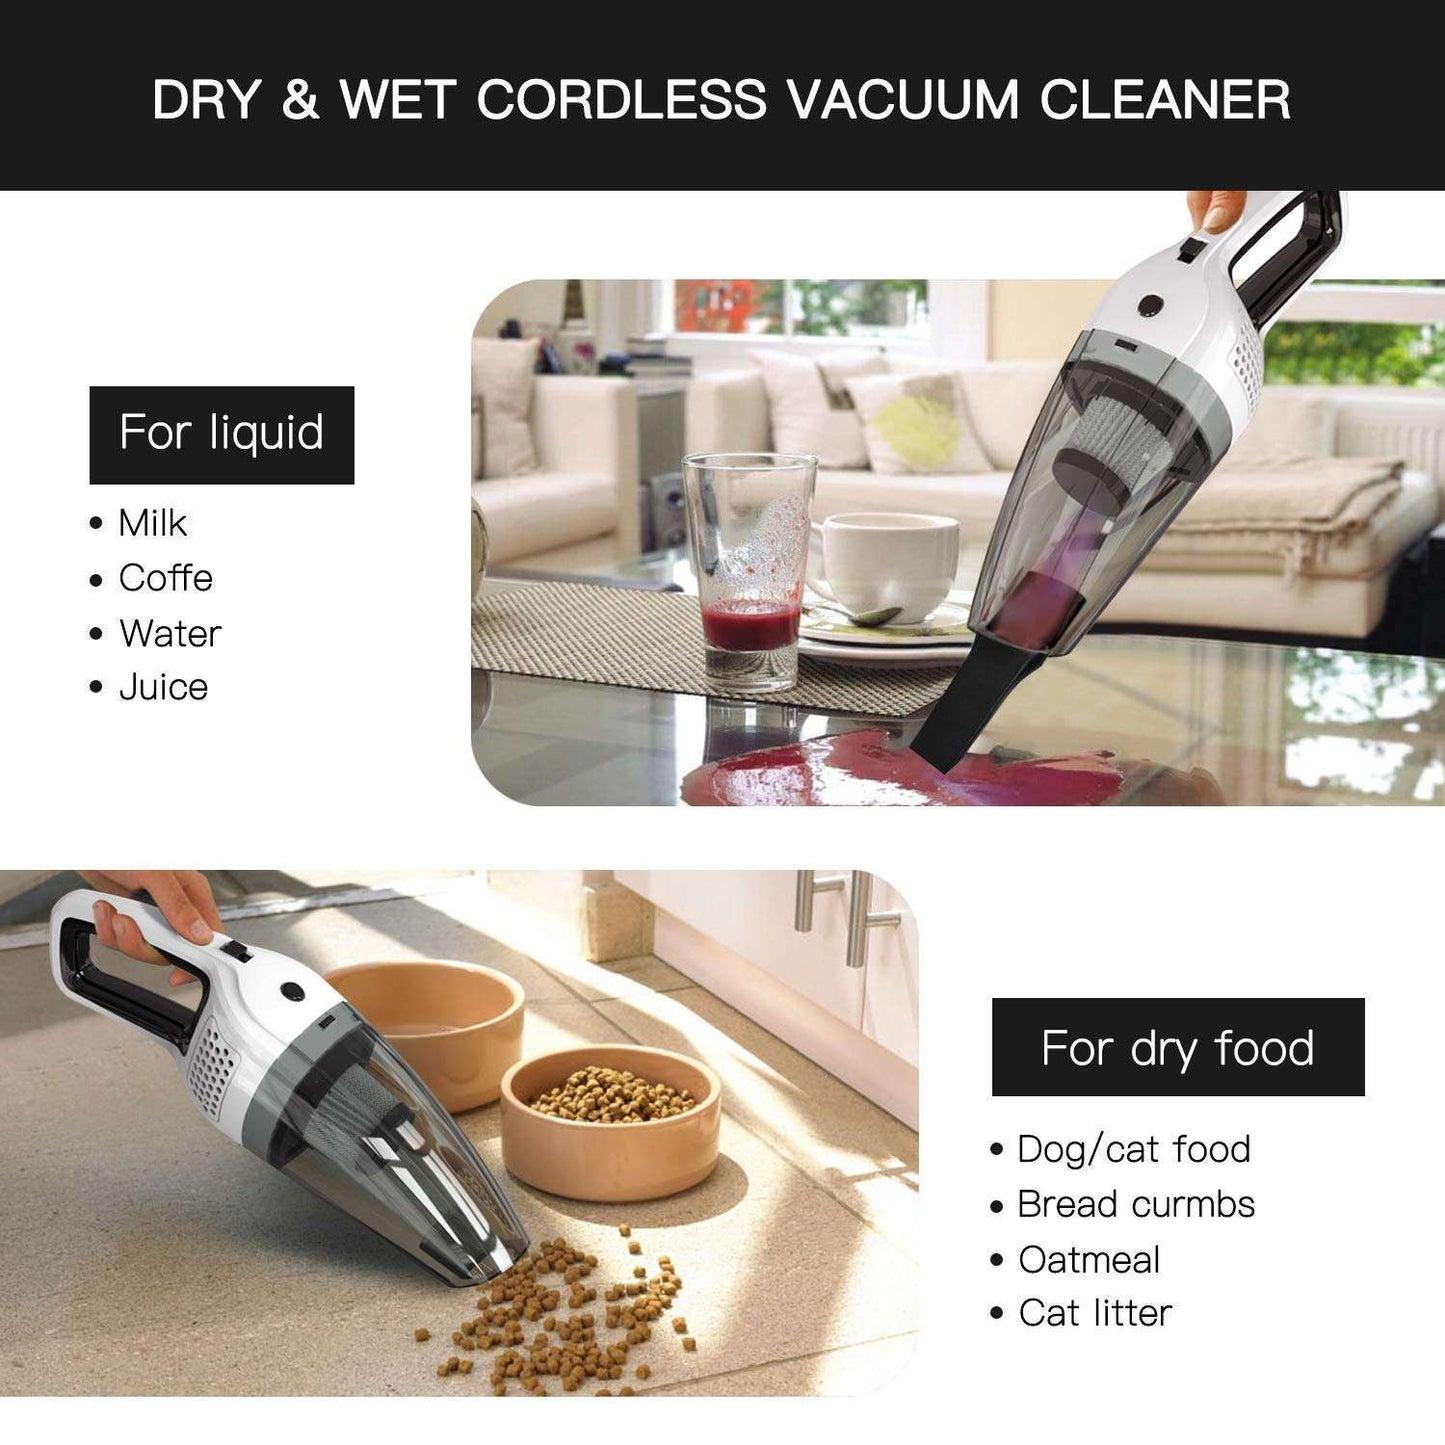 BOLWEO Handheld Cordless Vacuum Cleaner, DC 12V Portable Car Vacuum Cleaner for Car and Home with Strong Suction High Power, Small Dust Buster for Wet & Dry Use - Hatke